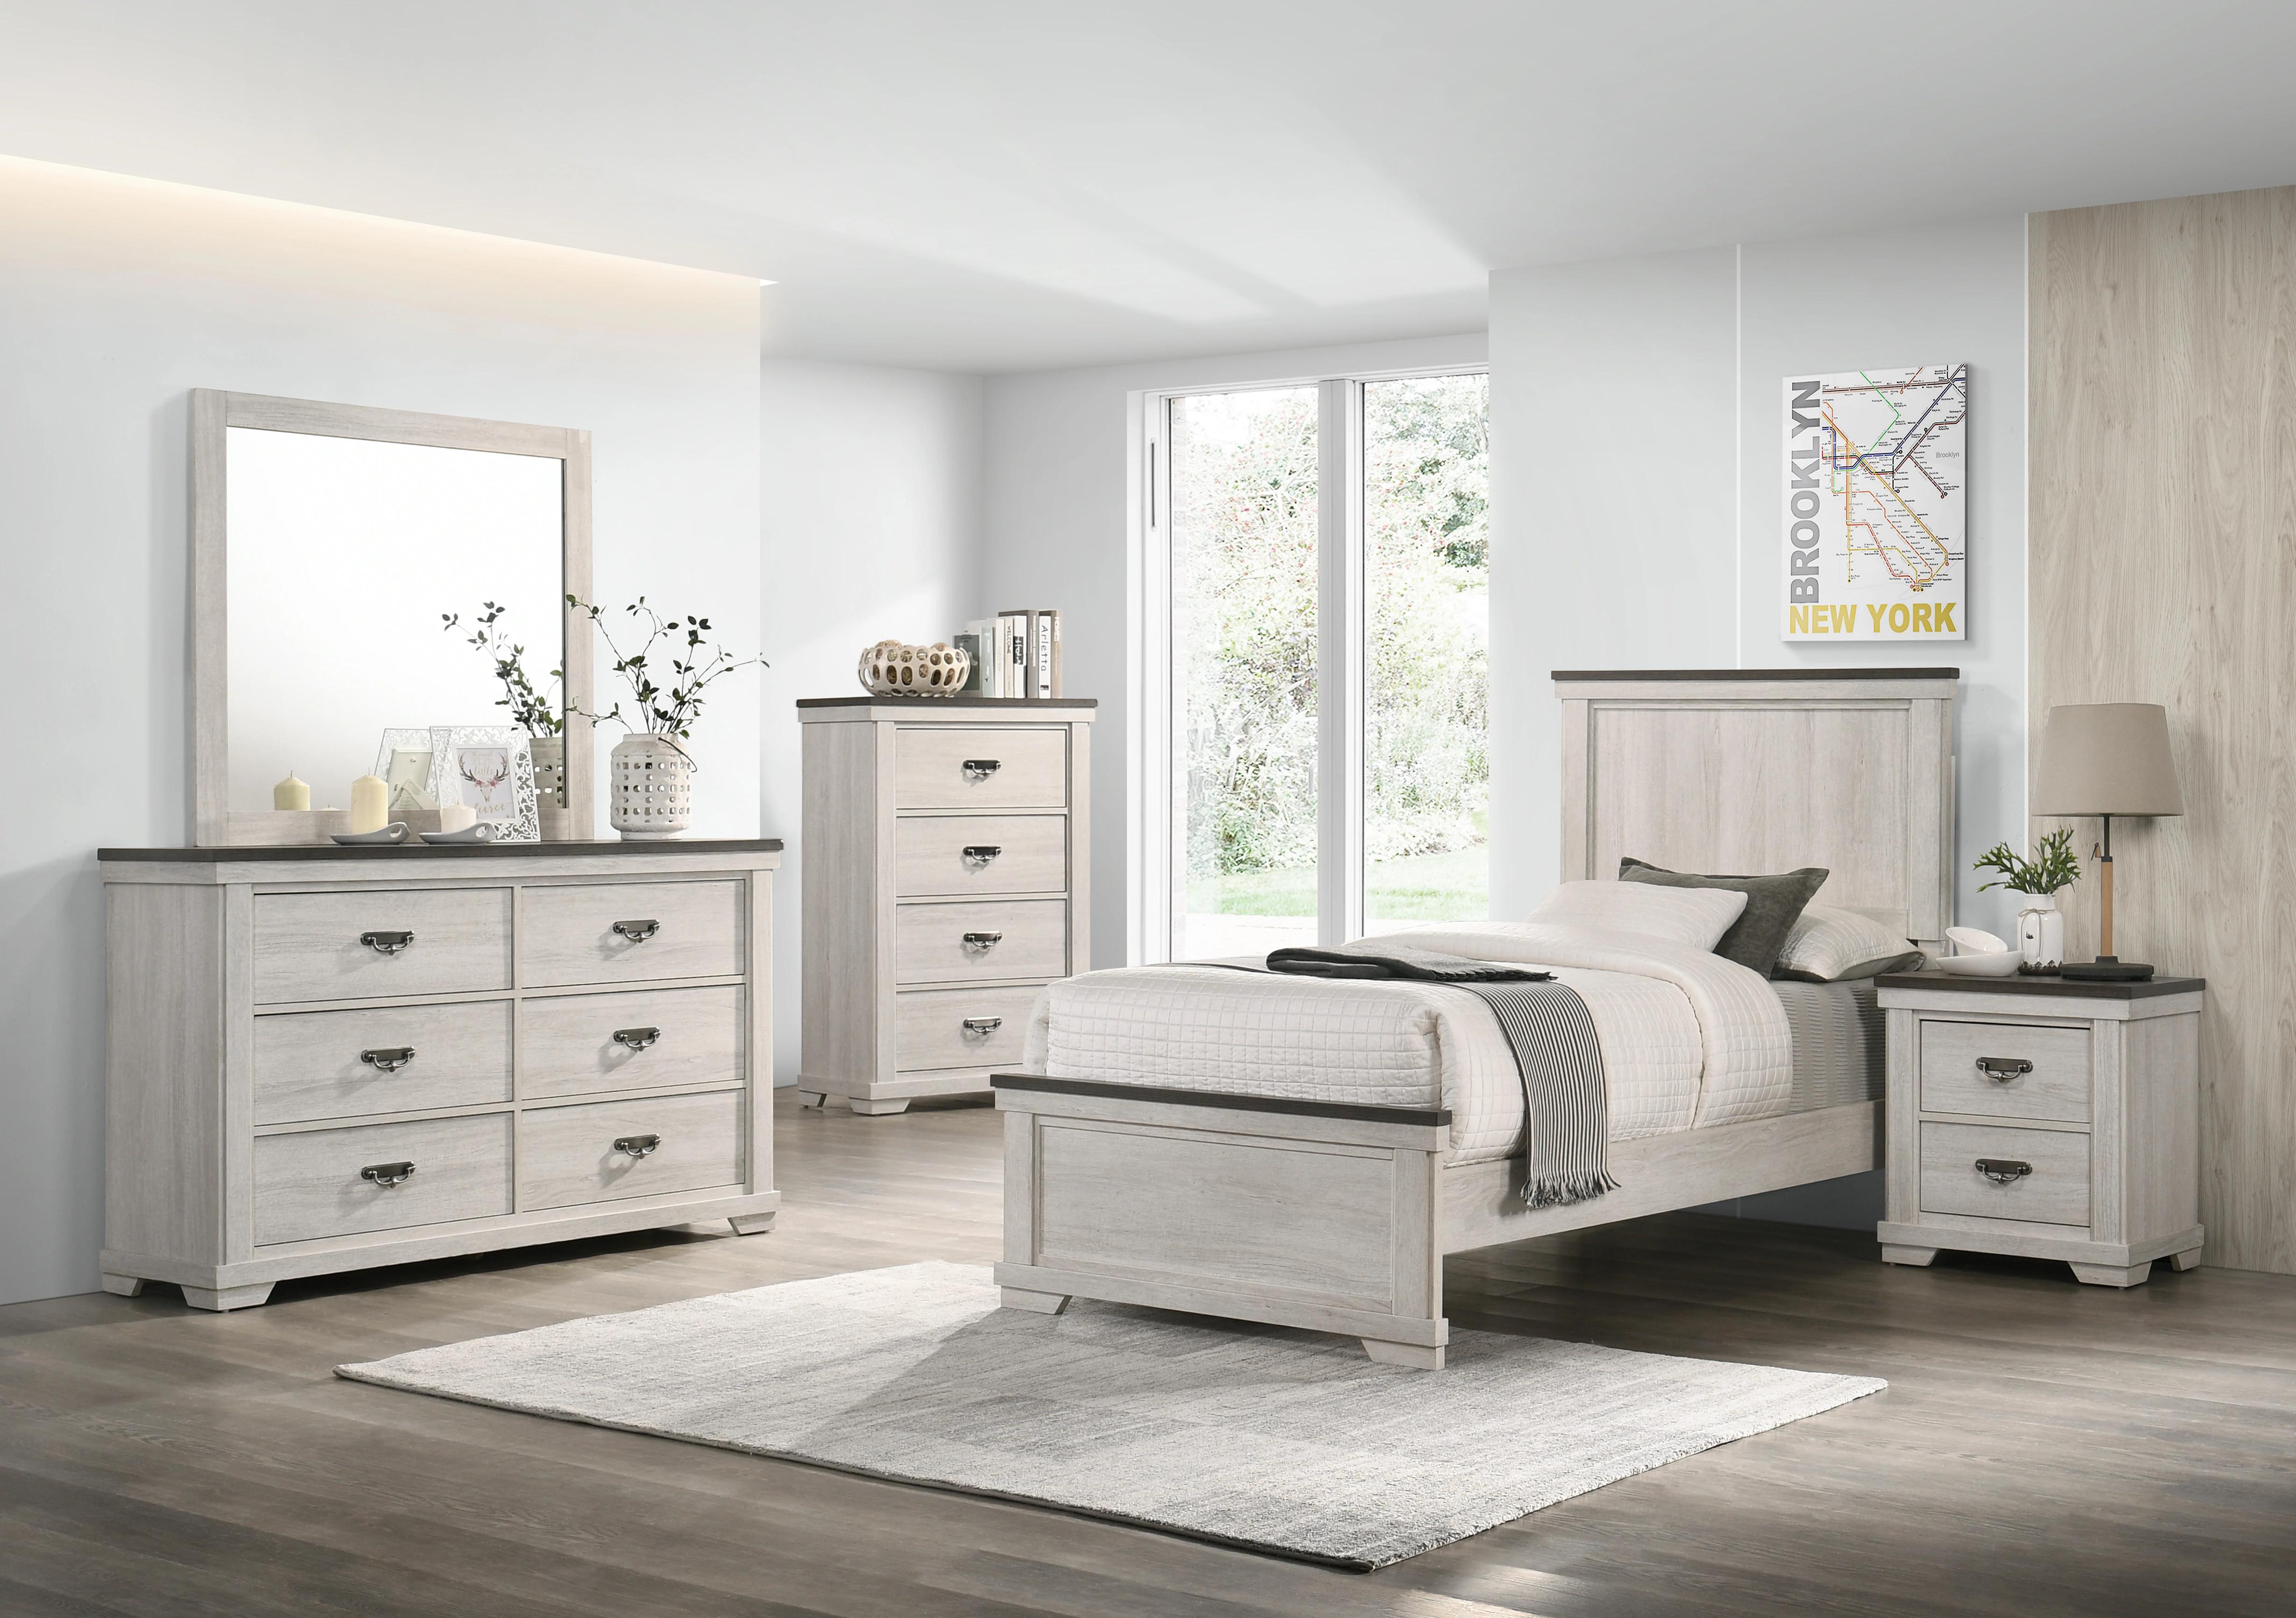 Rustic, Farmhouse Panel Bedroom Set Leighton B8180-T-Bed-5pcs in Antique White 